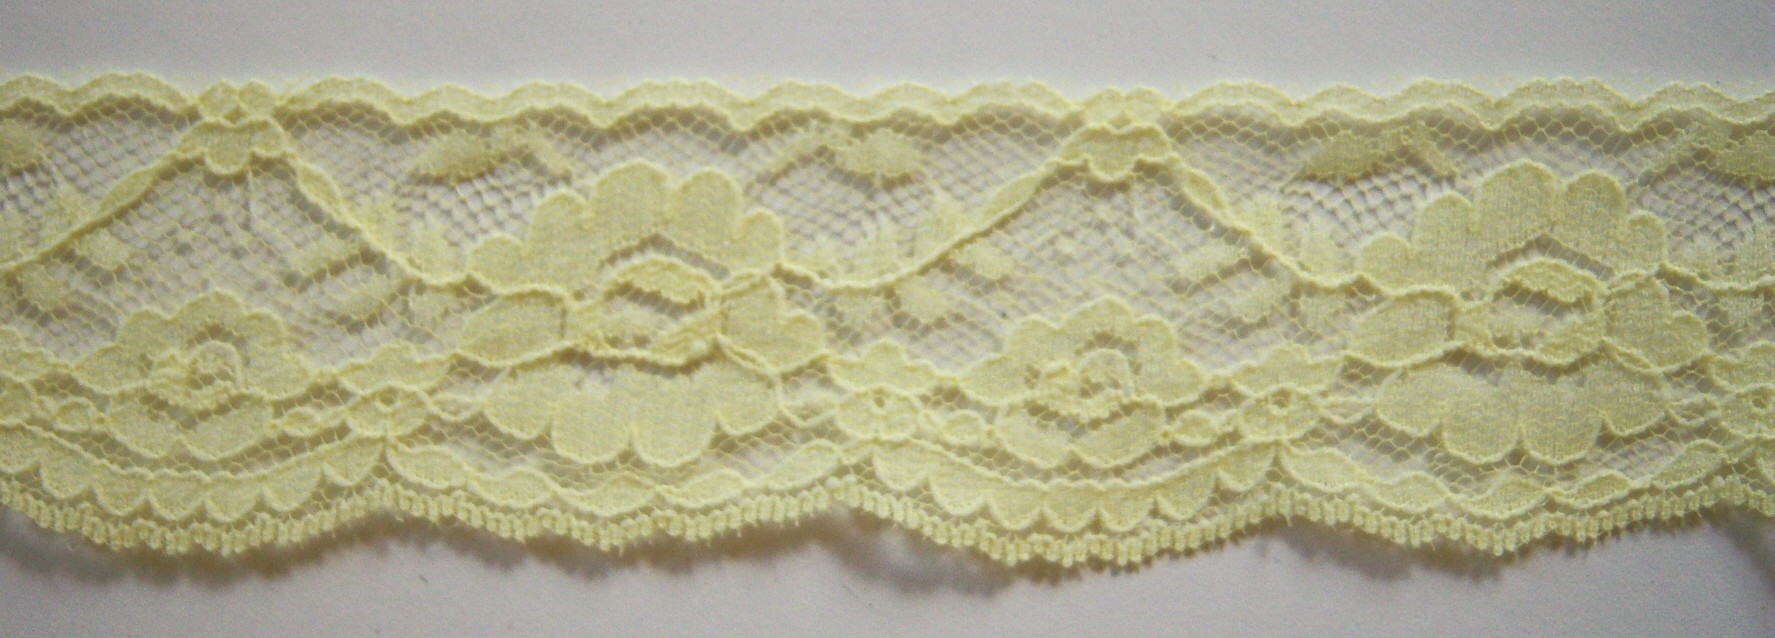 Canary 1 7/8" Lace